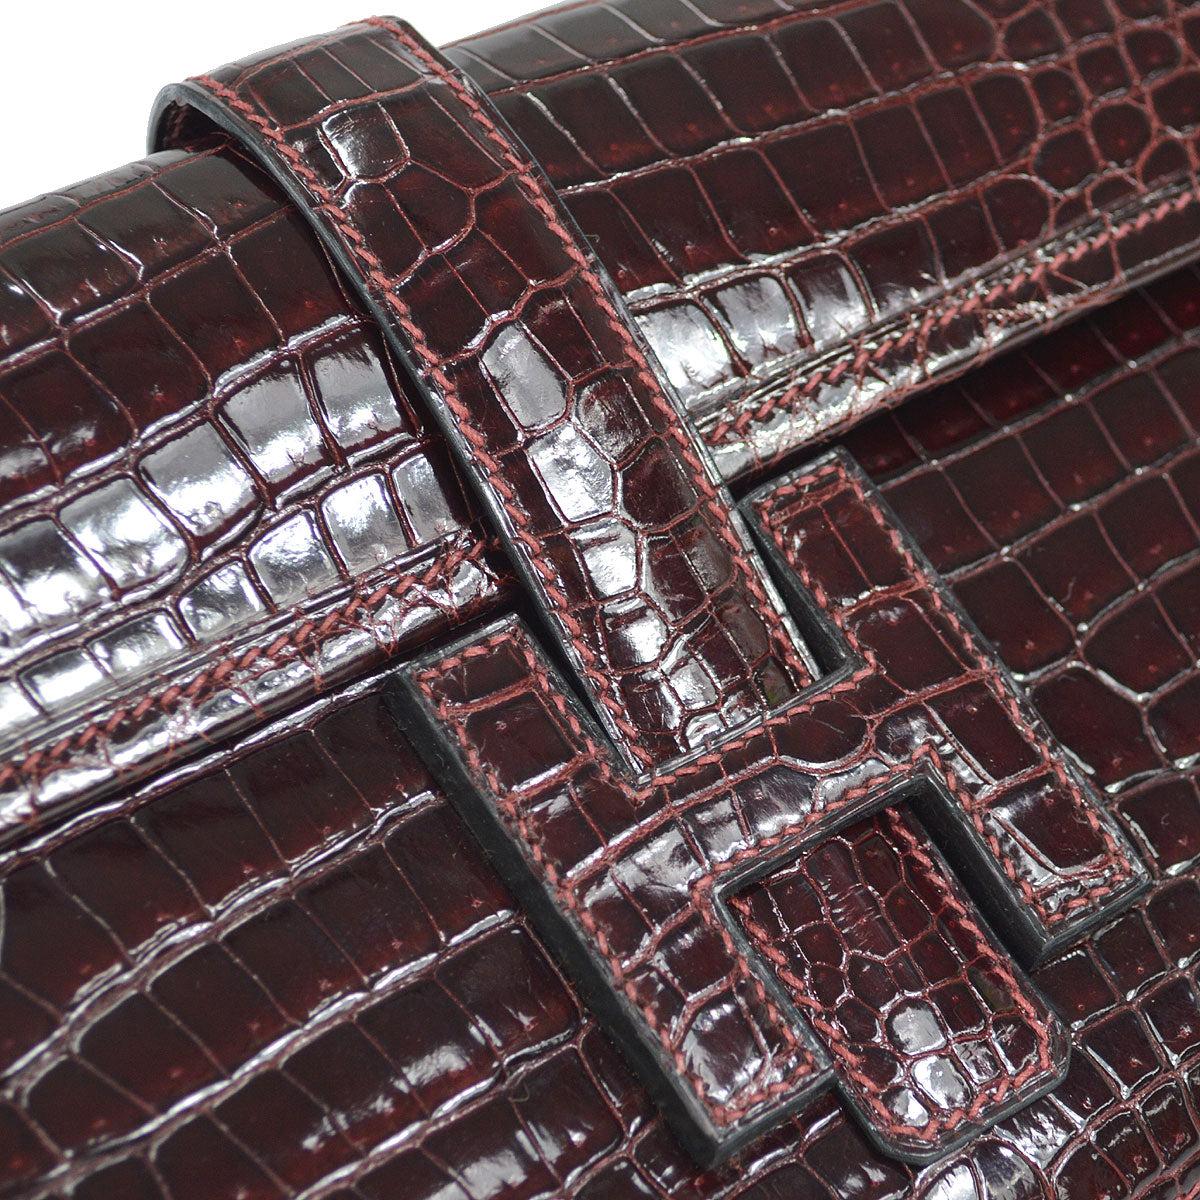 Pre-Owned Vintage Condition
From 2002 Collection
Porosus Crocodile Skin
Including Dust Bag
W 11.4 x H 5.9 x D 0.8 